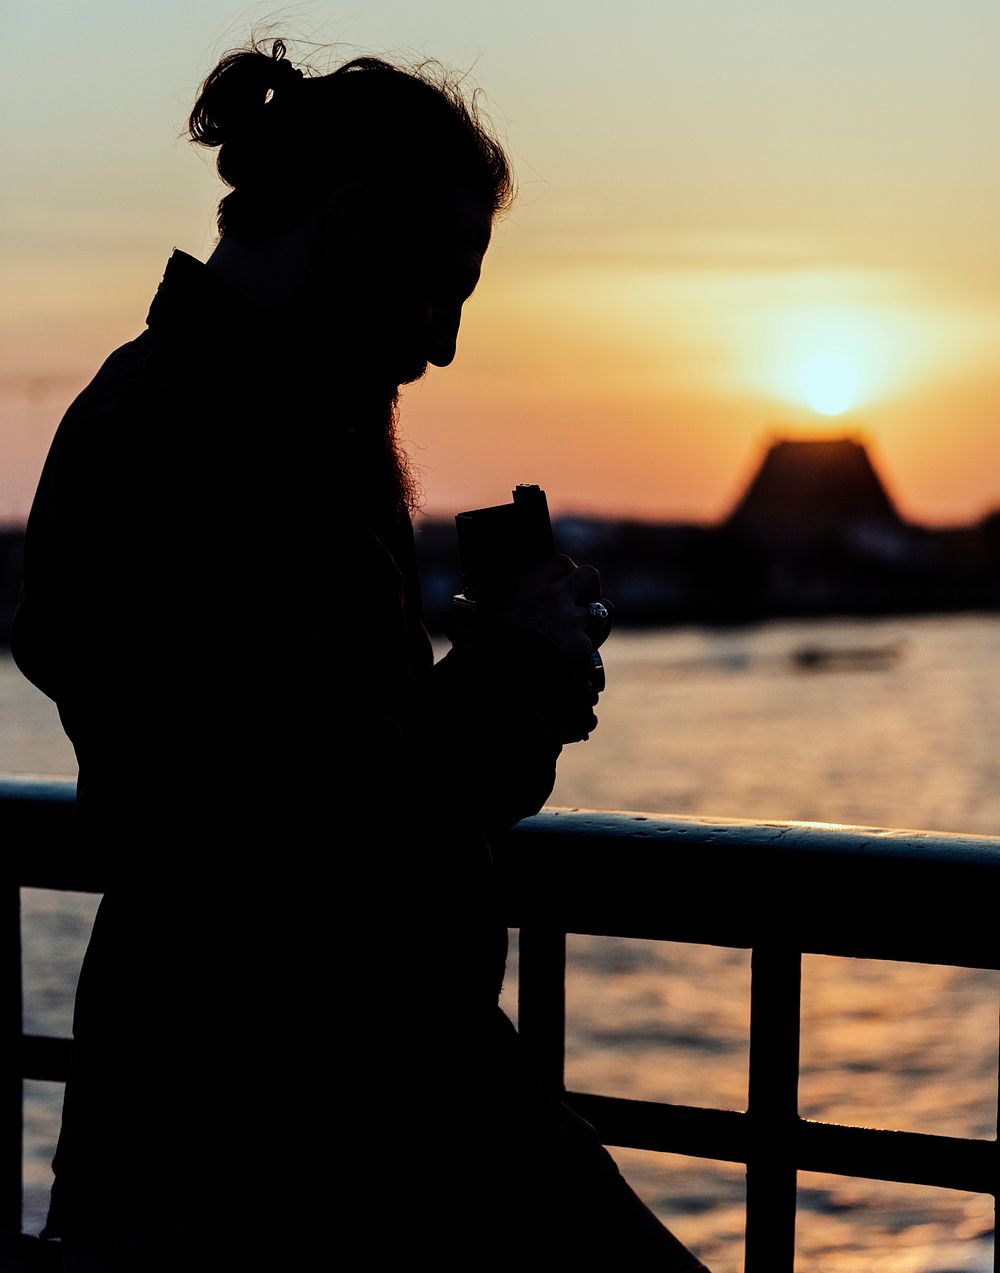 Silhouette of a photographer